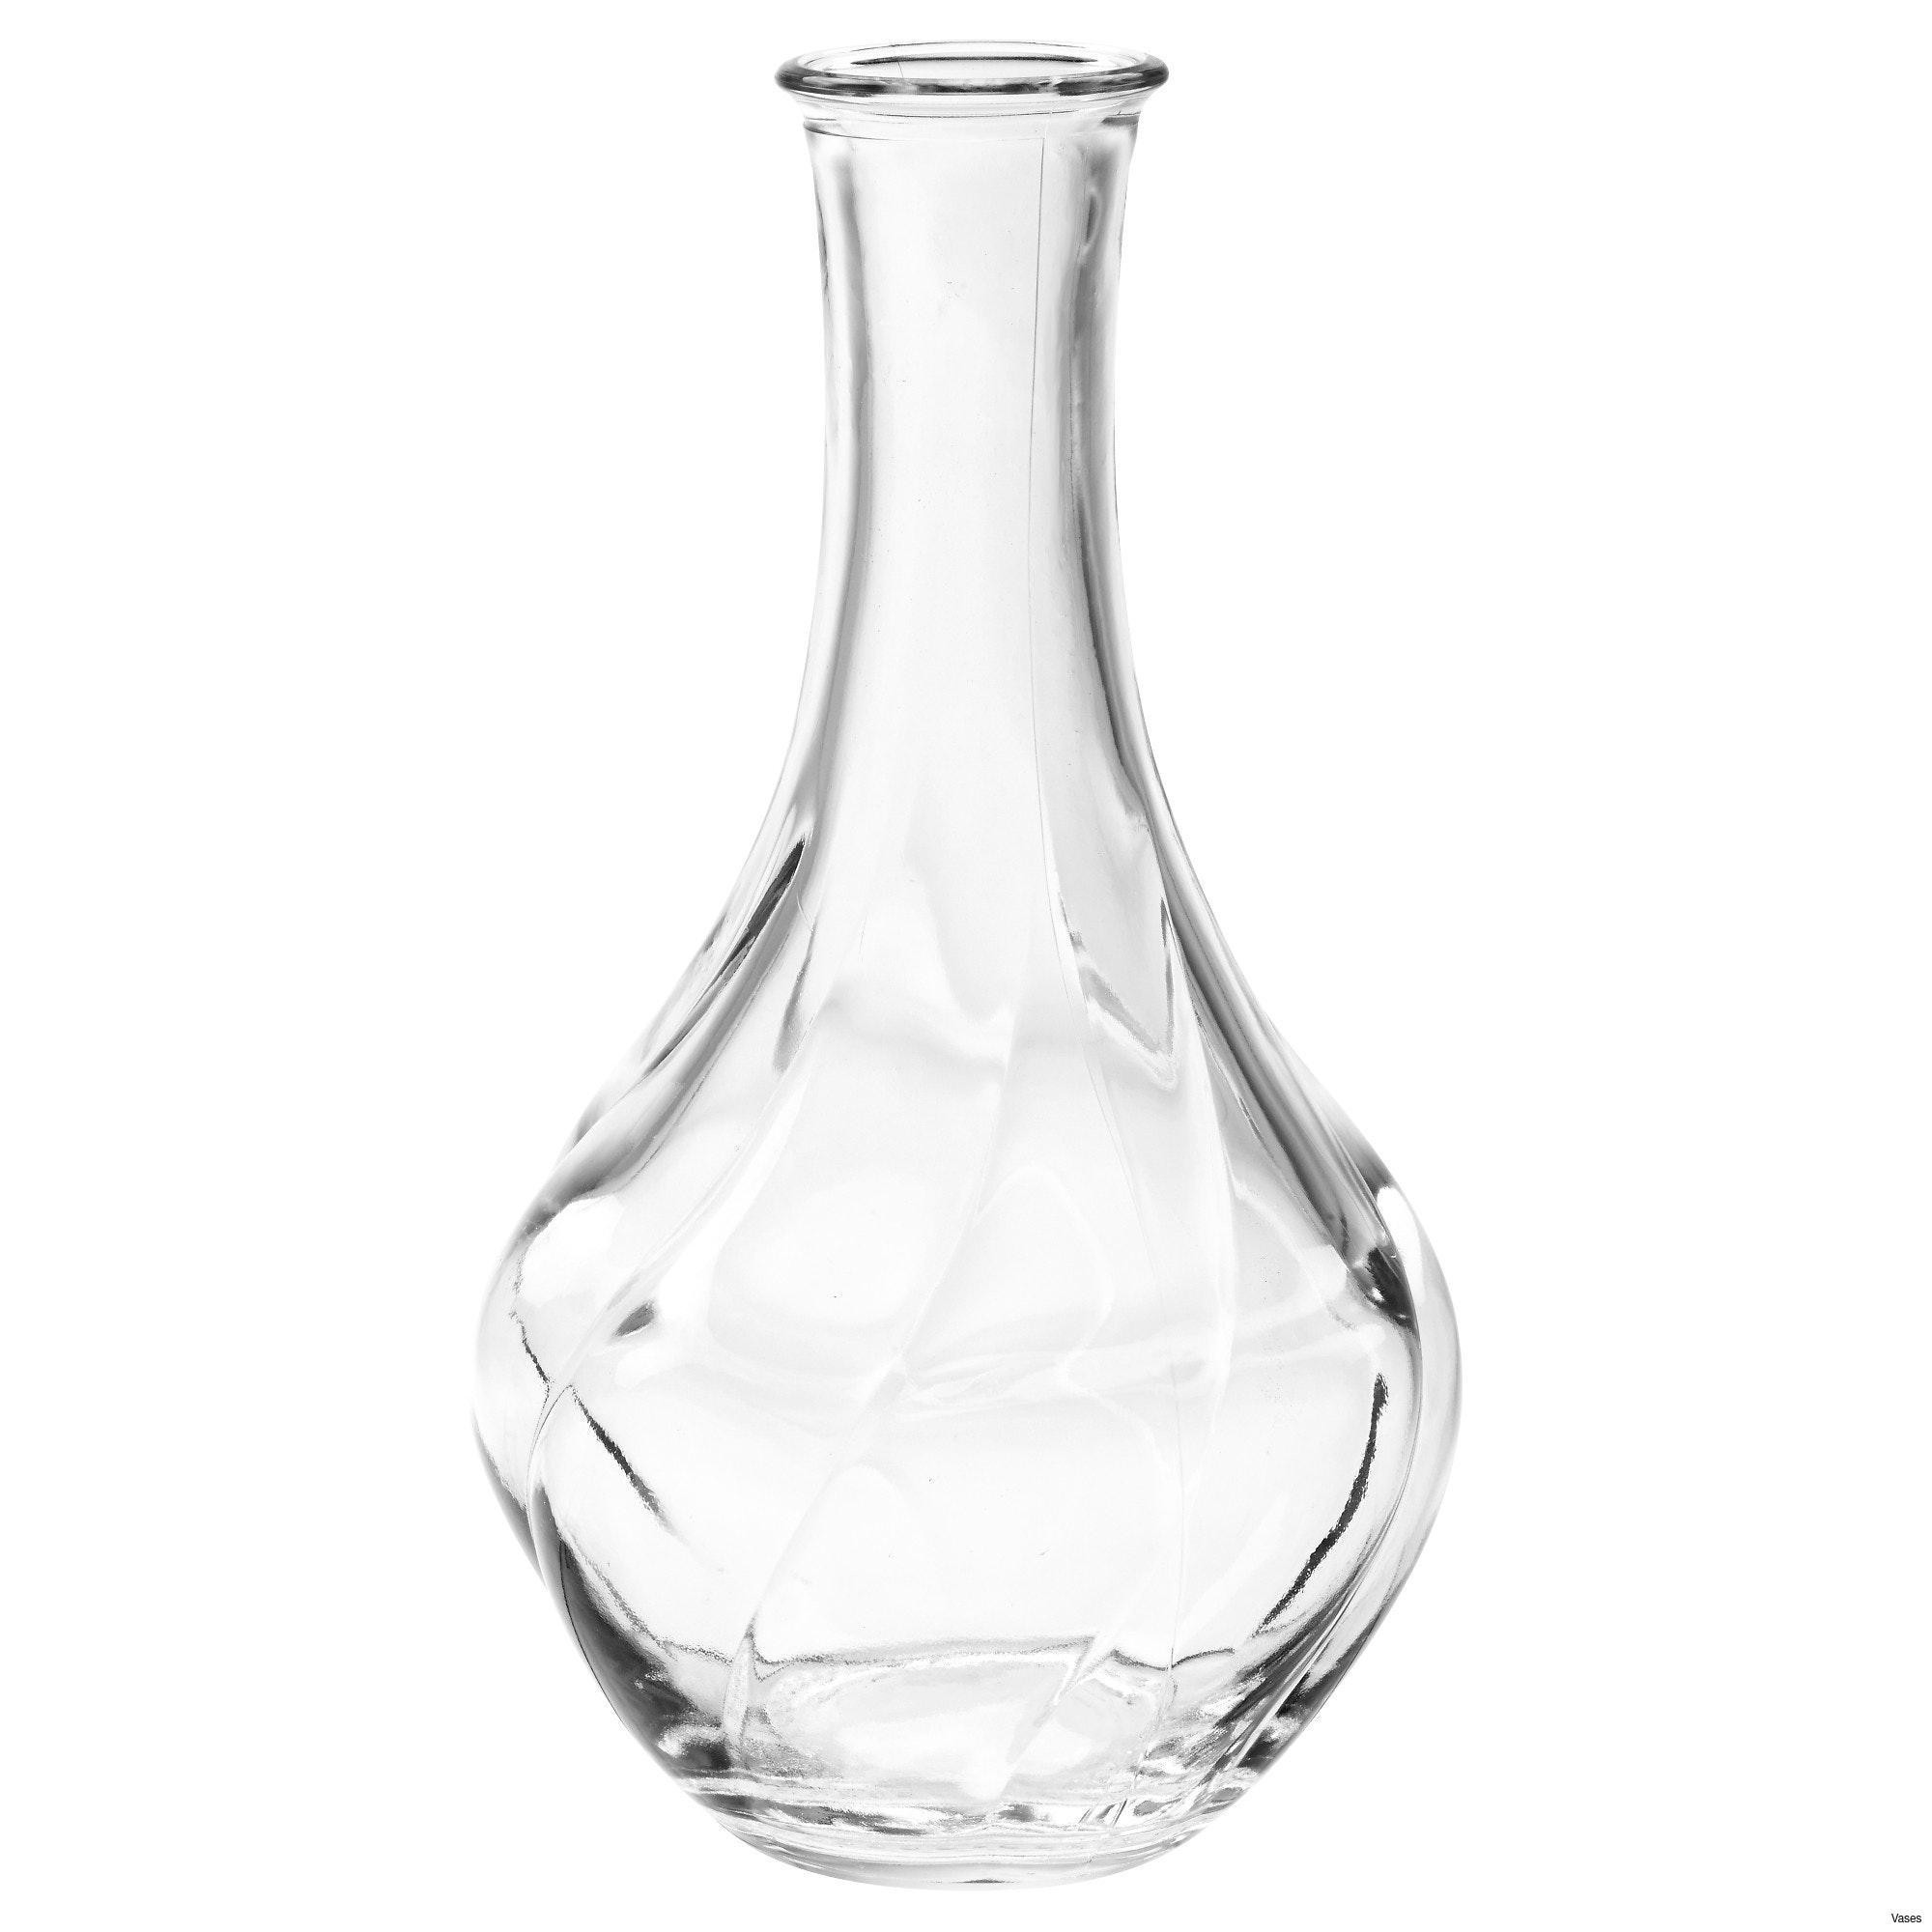 11 Stylish 24 Inch Flower Vase 2024 free download 24 inch flower vase of glass vases with lids image living room glass vases fresh clear vase pertaining to glass vases with lids image living room glass vases fresh clear vase 0d tags amazing